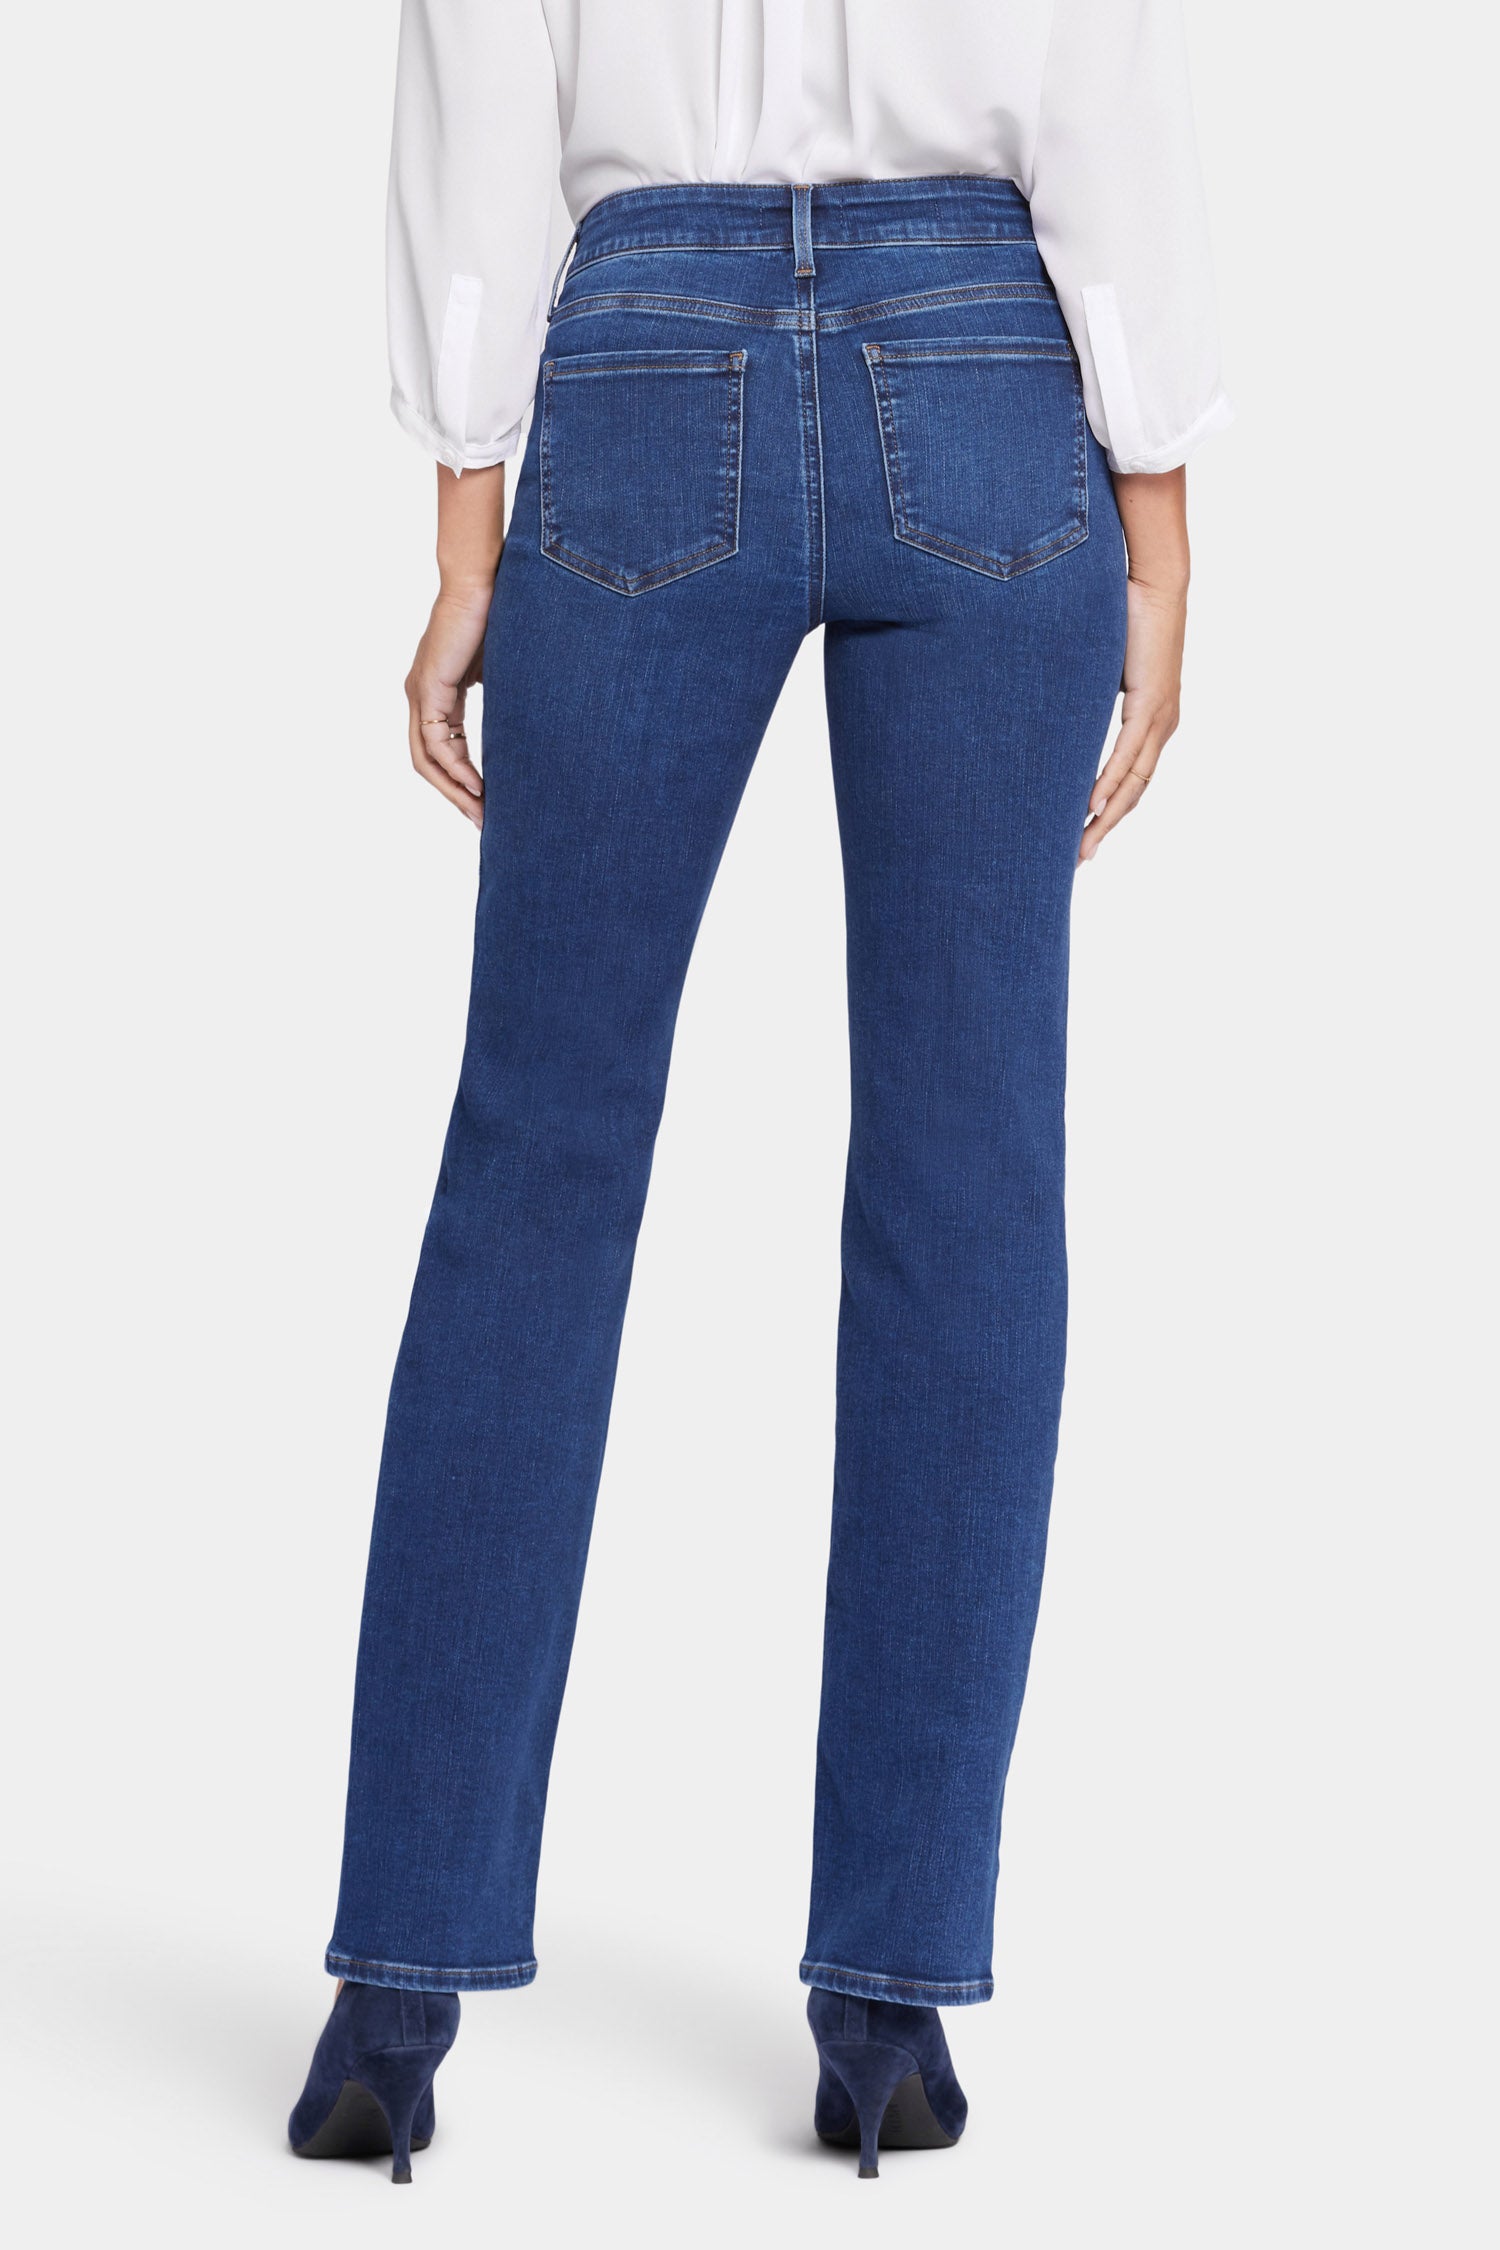 Marilyn Straight Jeans - Thistle Falls  Straight jeans, Bottom clothes,  Petite pants